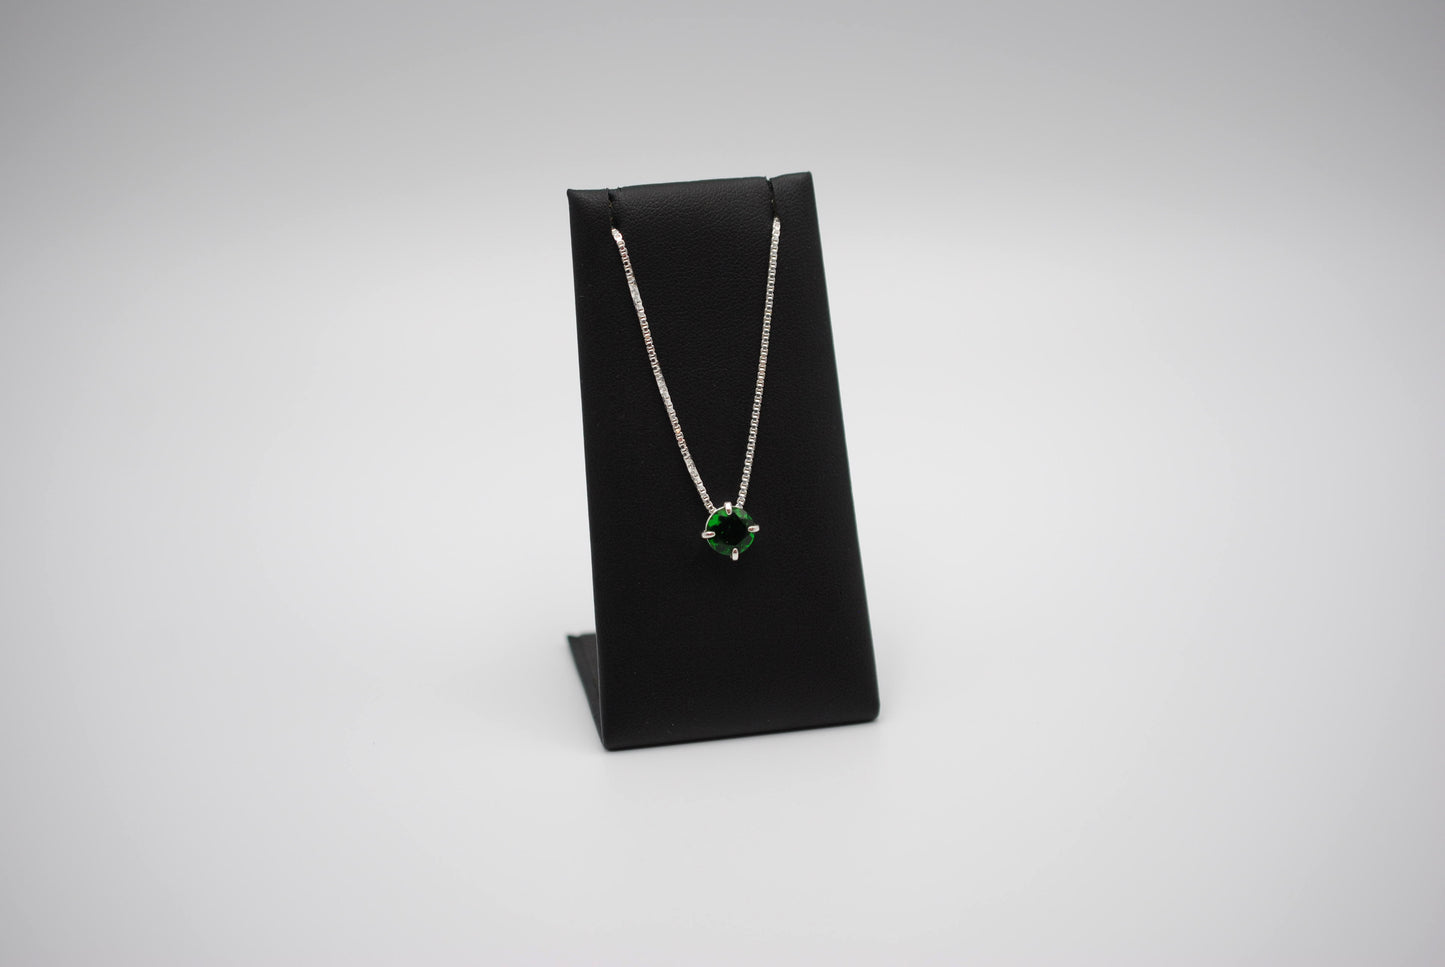 Birthstone Necklace: Round Emerald, Silver Prong Setting, Adjustable Chain